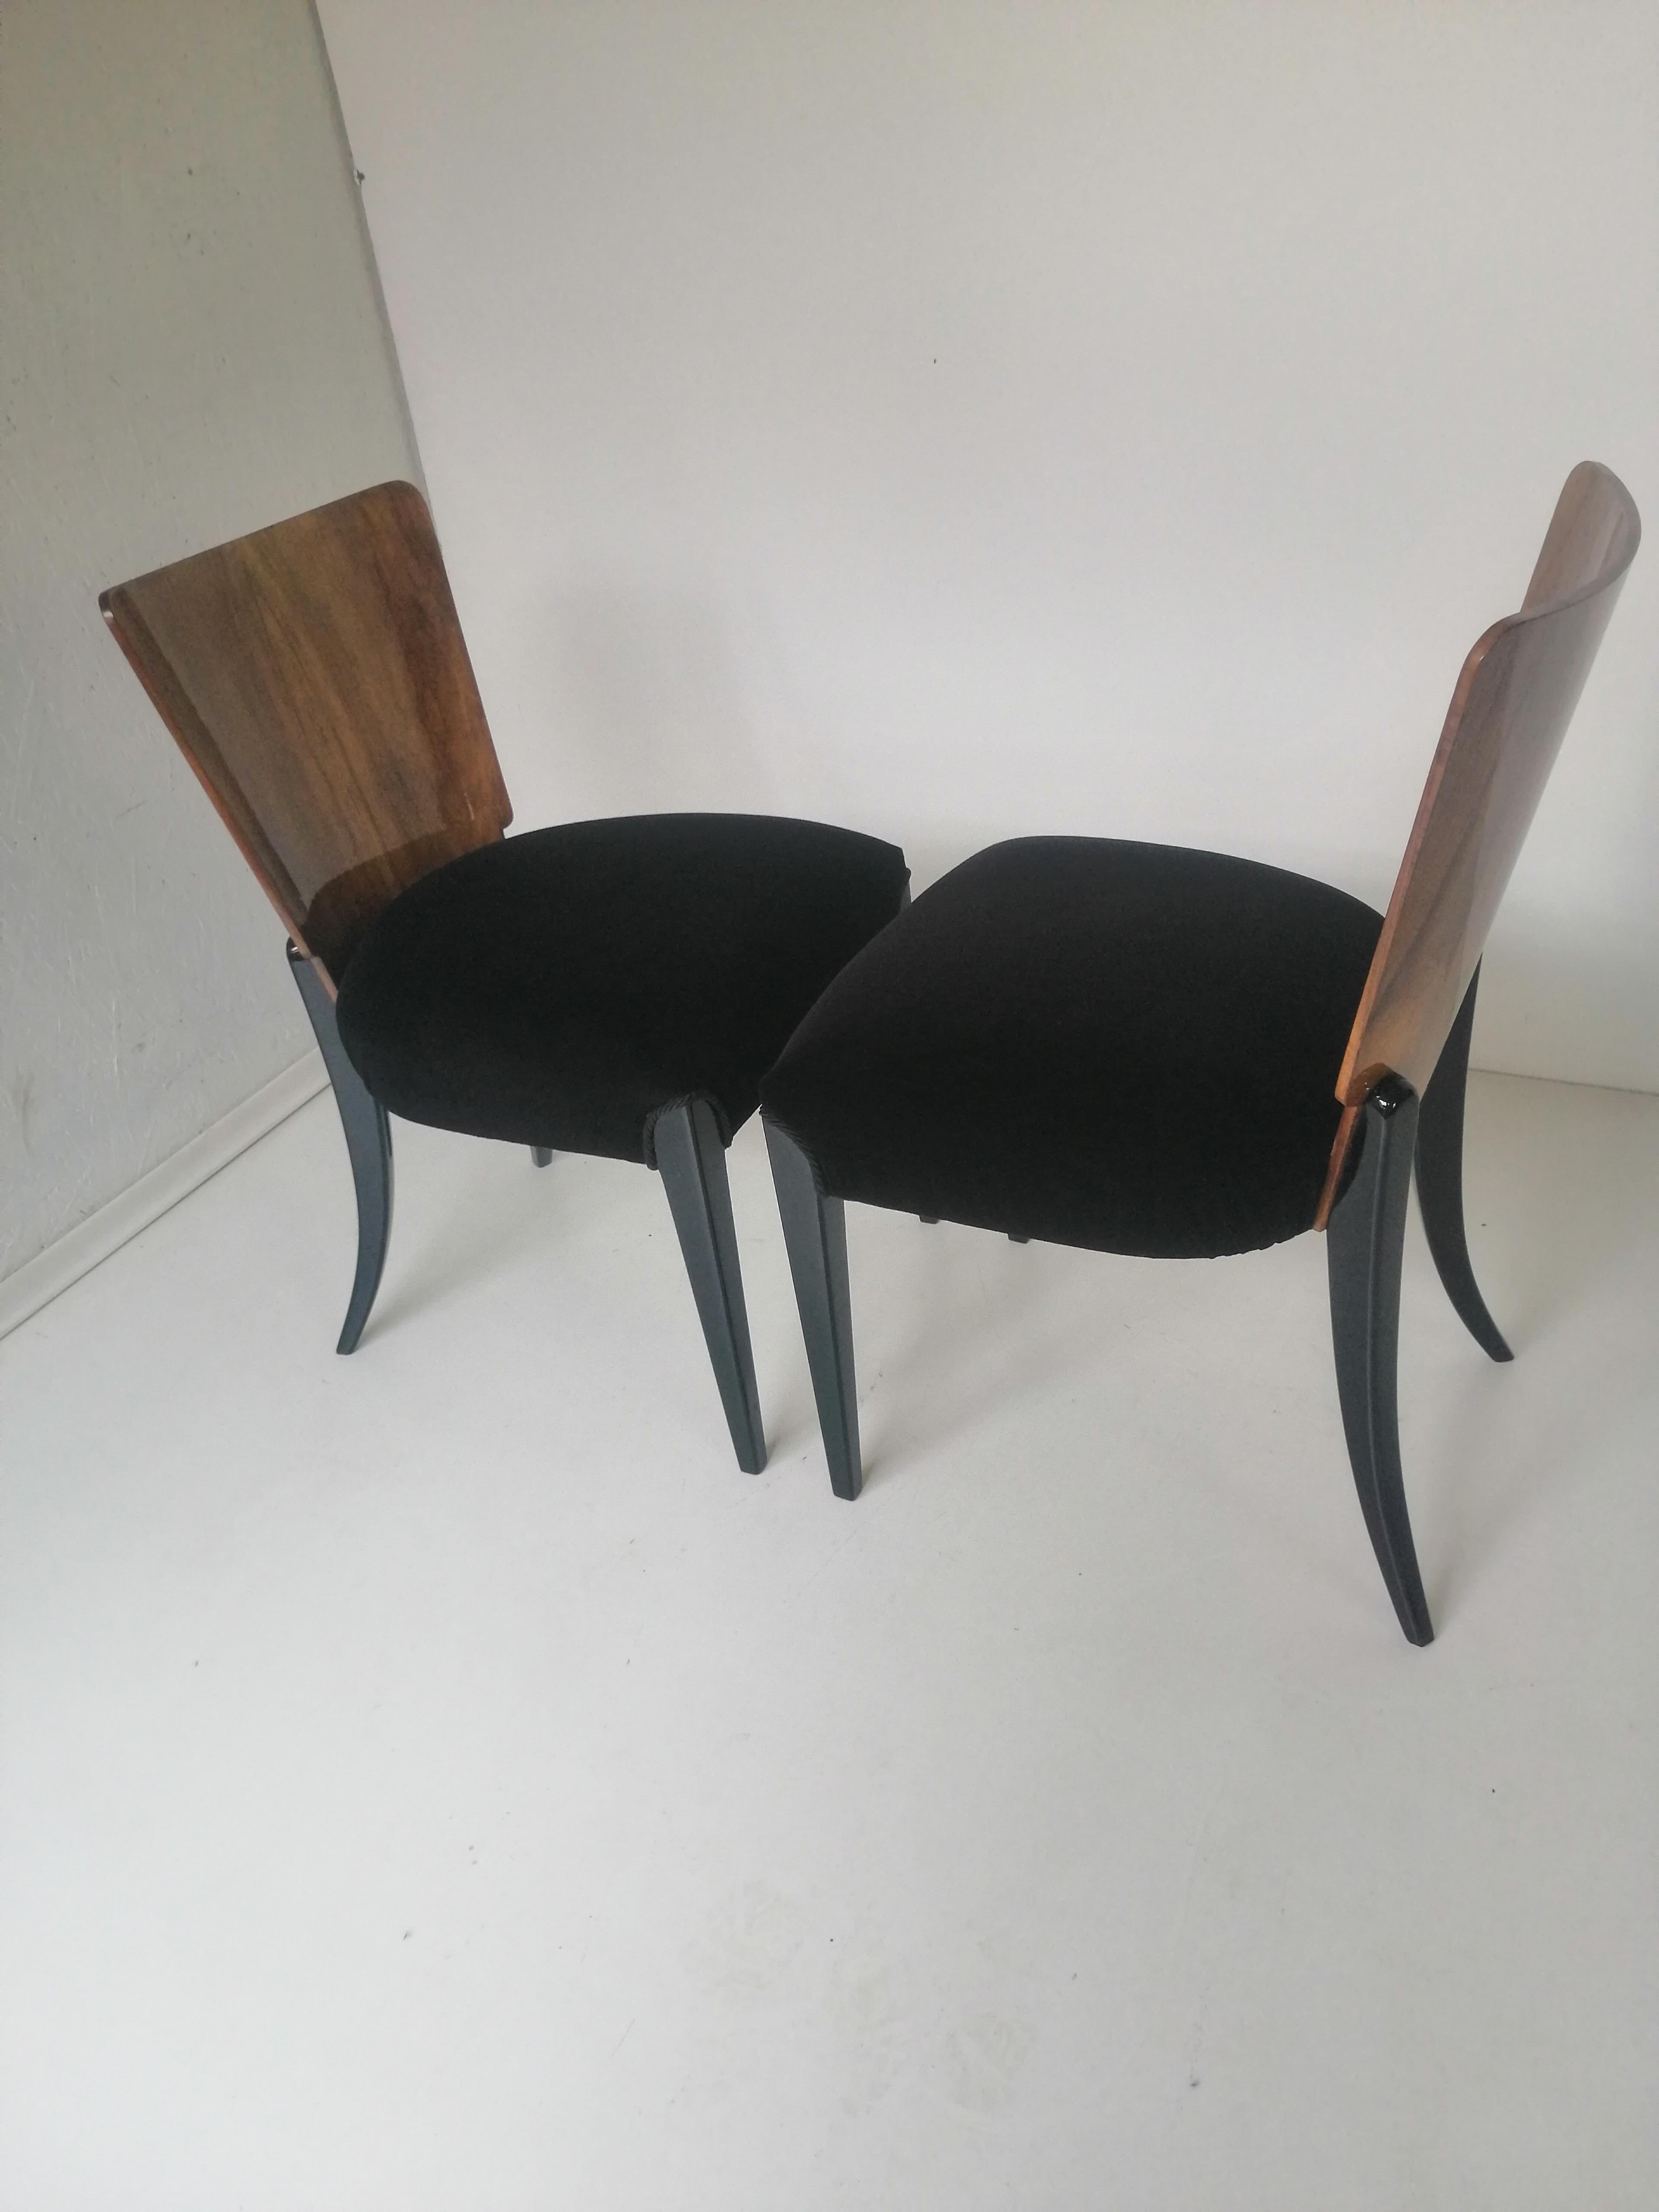 Art Deco four chairs by J.Halabala from 1940 we present the chairs by J.Halabala from 1940s (a Czech designer ranked among the most outstanding creators of the modern period. The peak of his career fell on the 1930s and 1940s when he worked for a